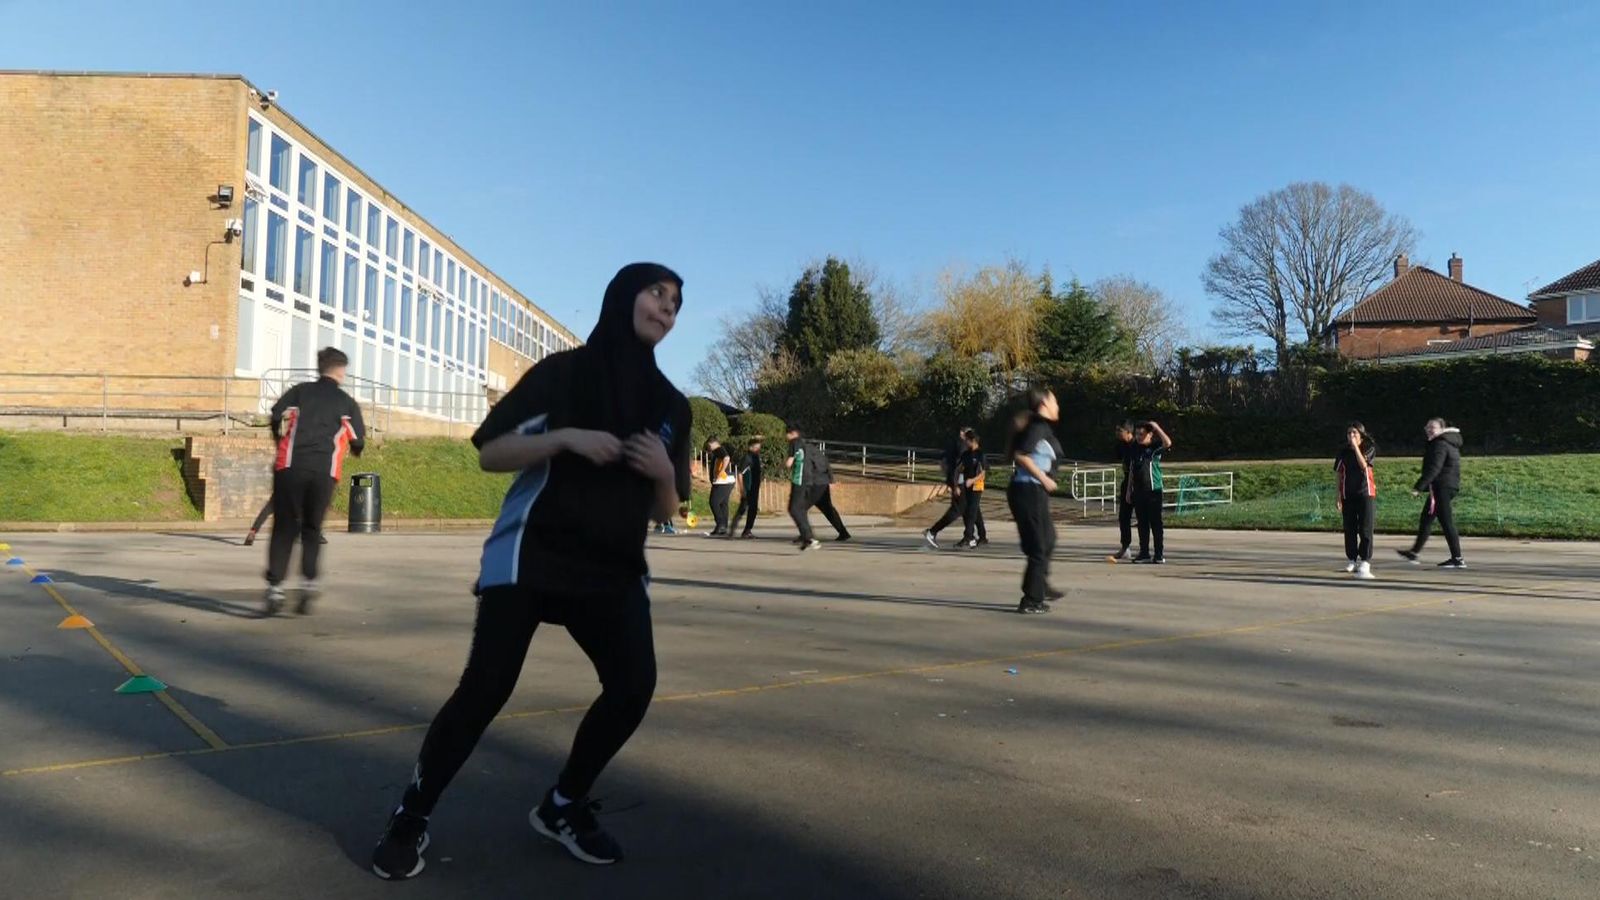 Fasting students kept on track with PE lessons ahead of Ramadan